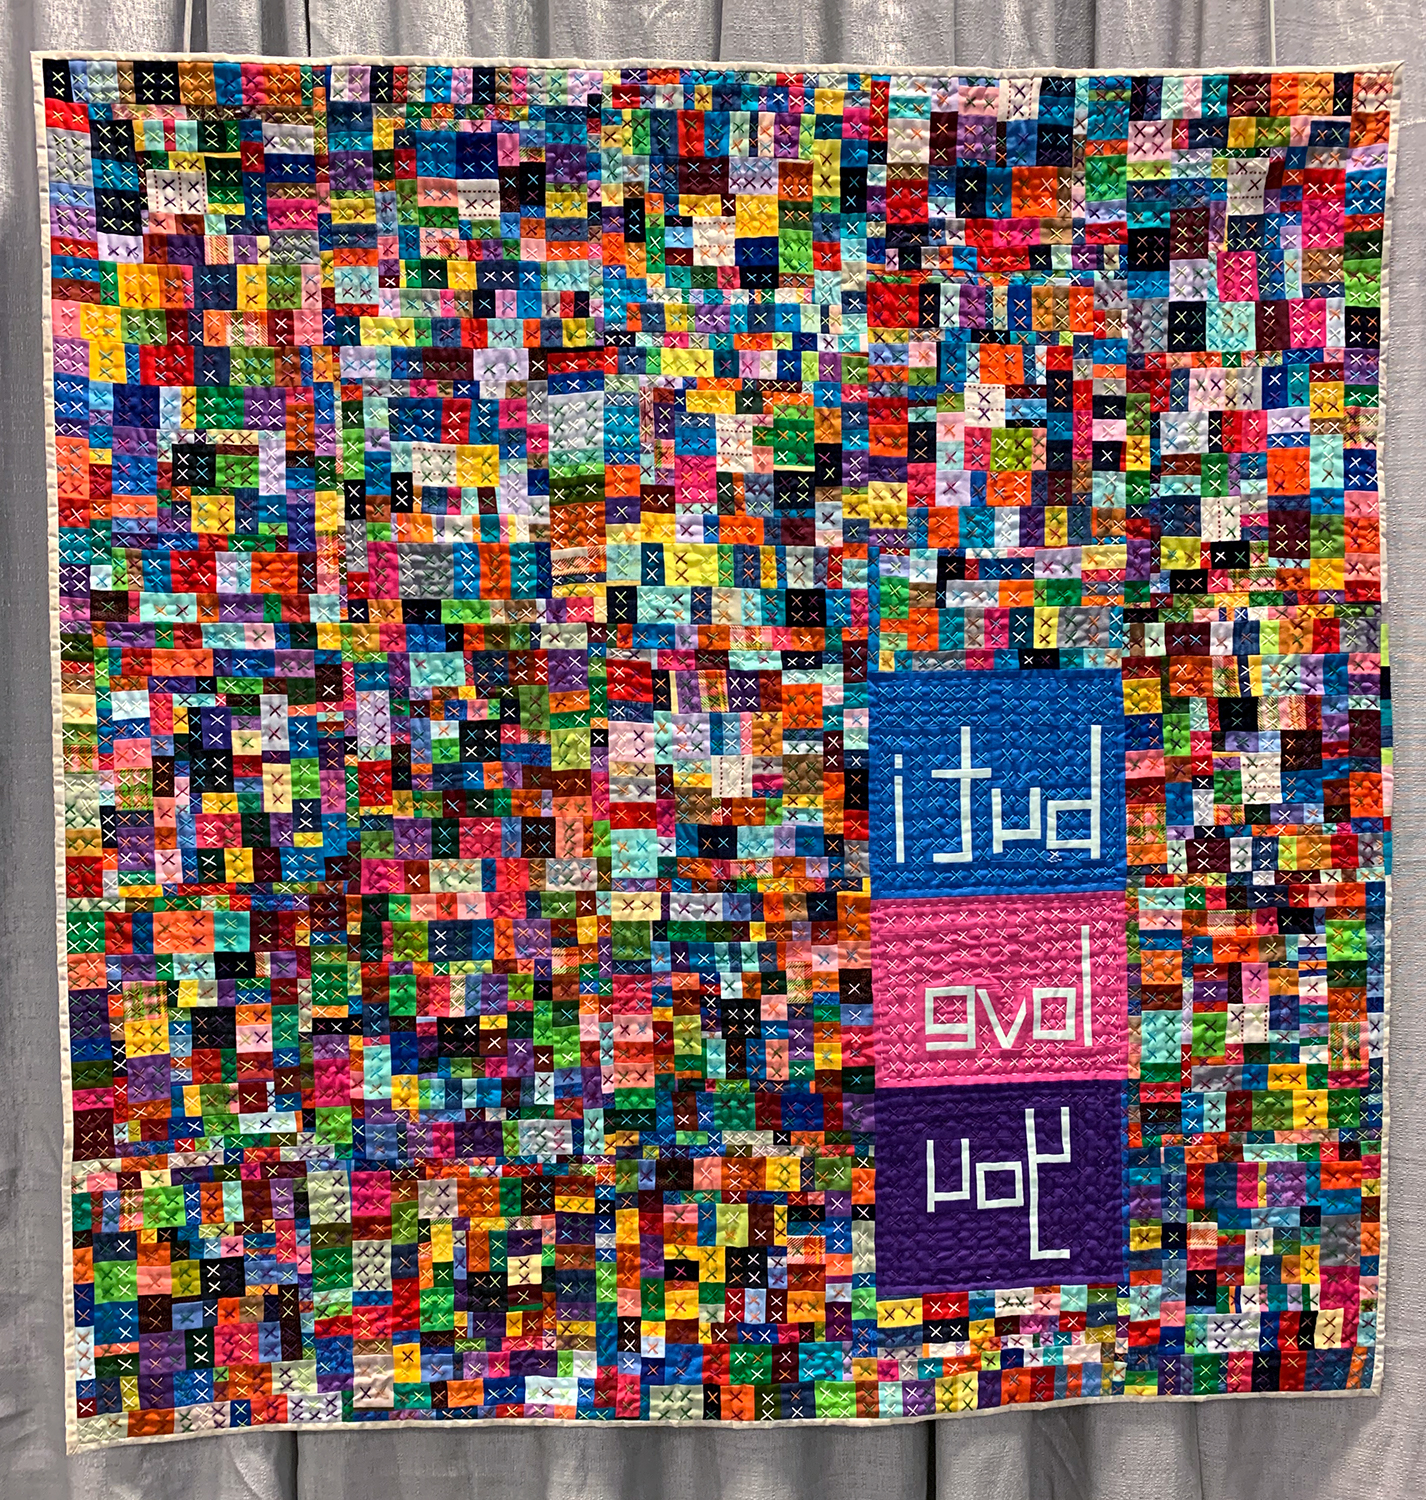 colorful modern quilt with the words "uoy evol i tub" in the lower right corner